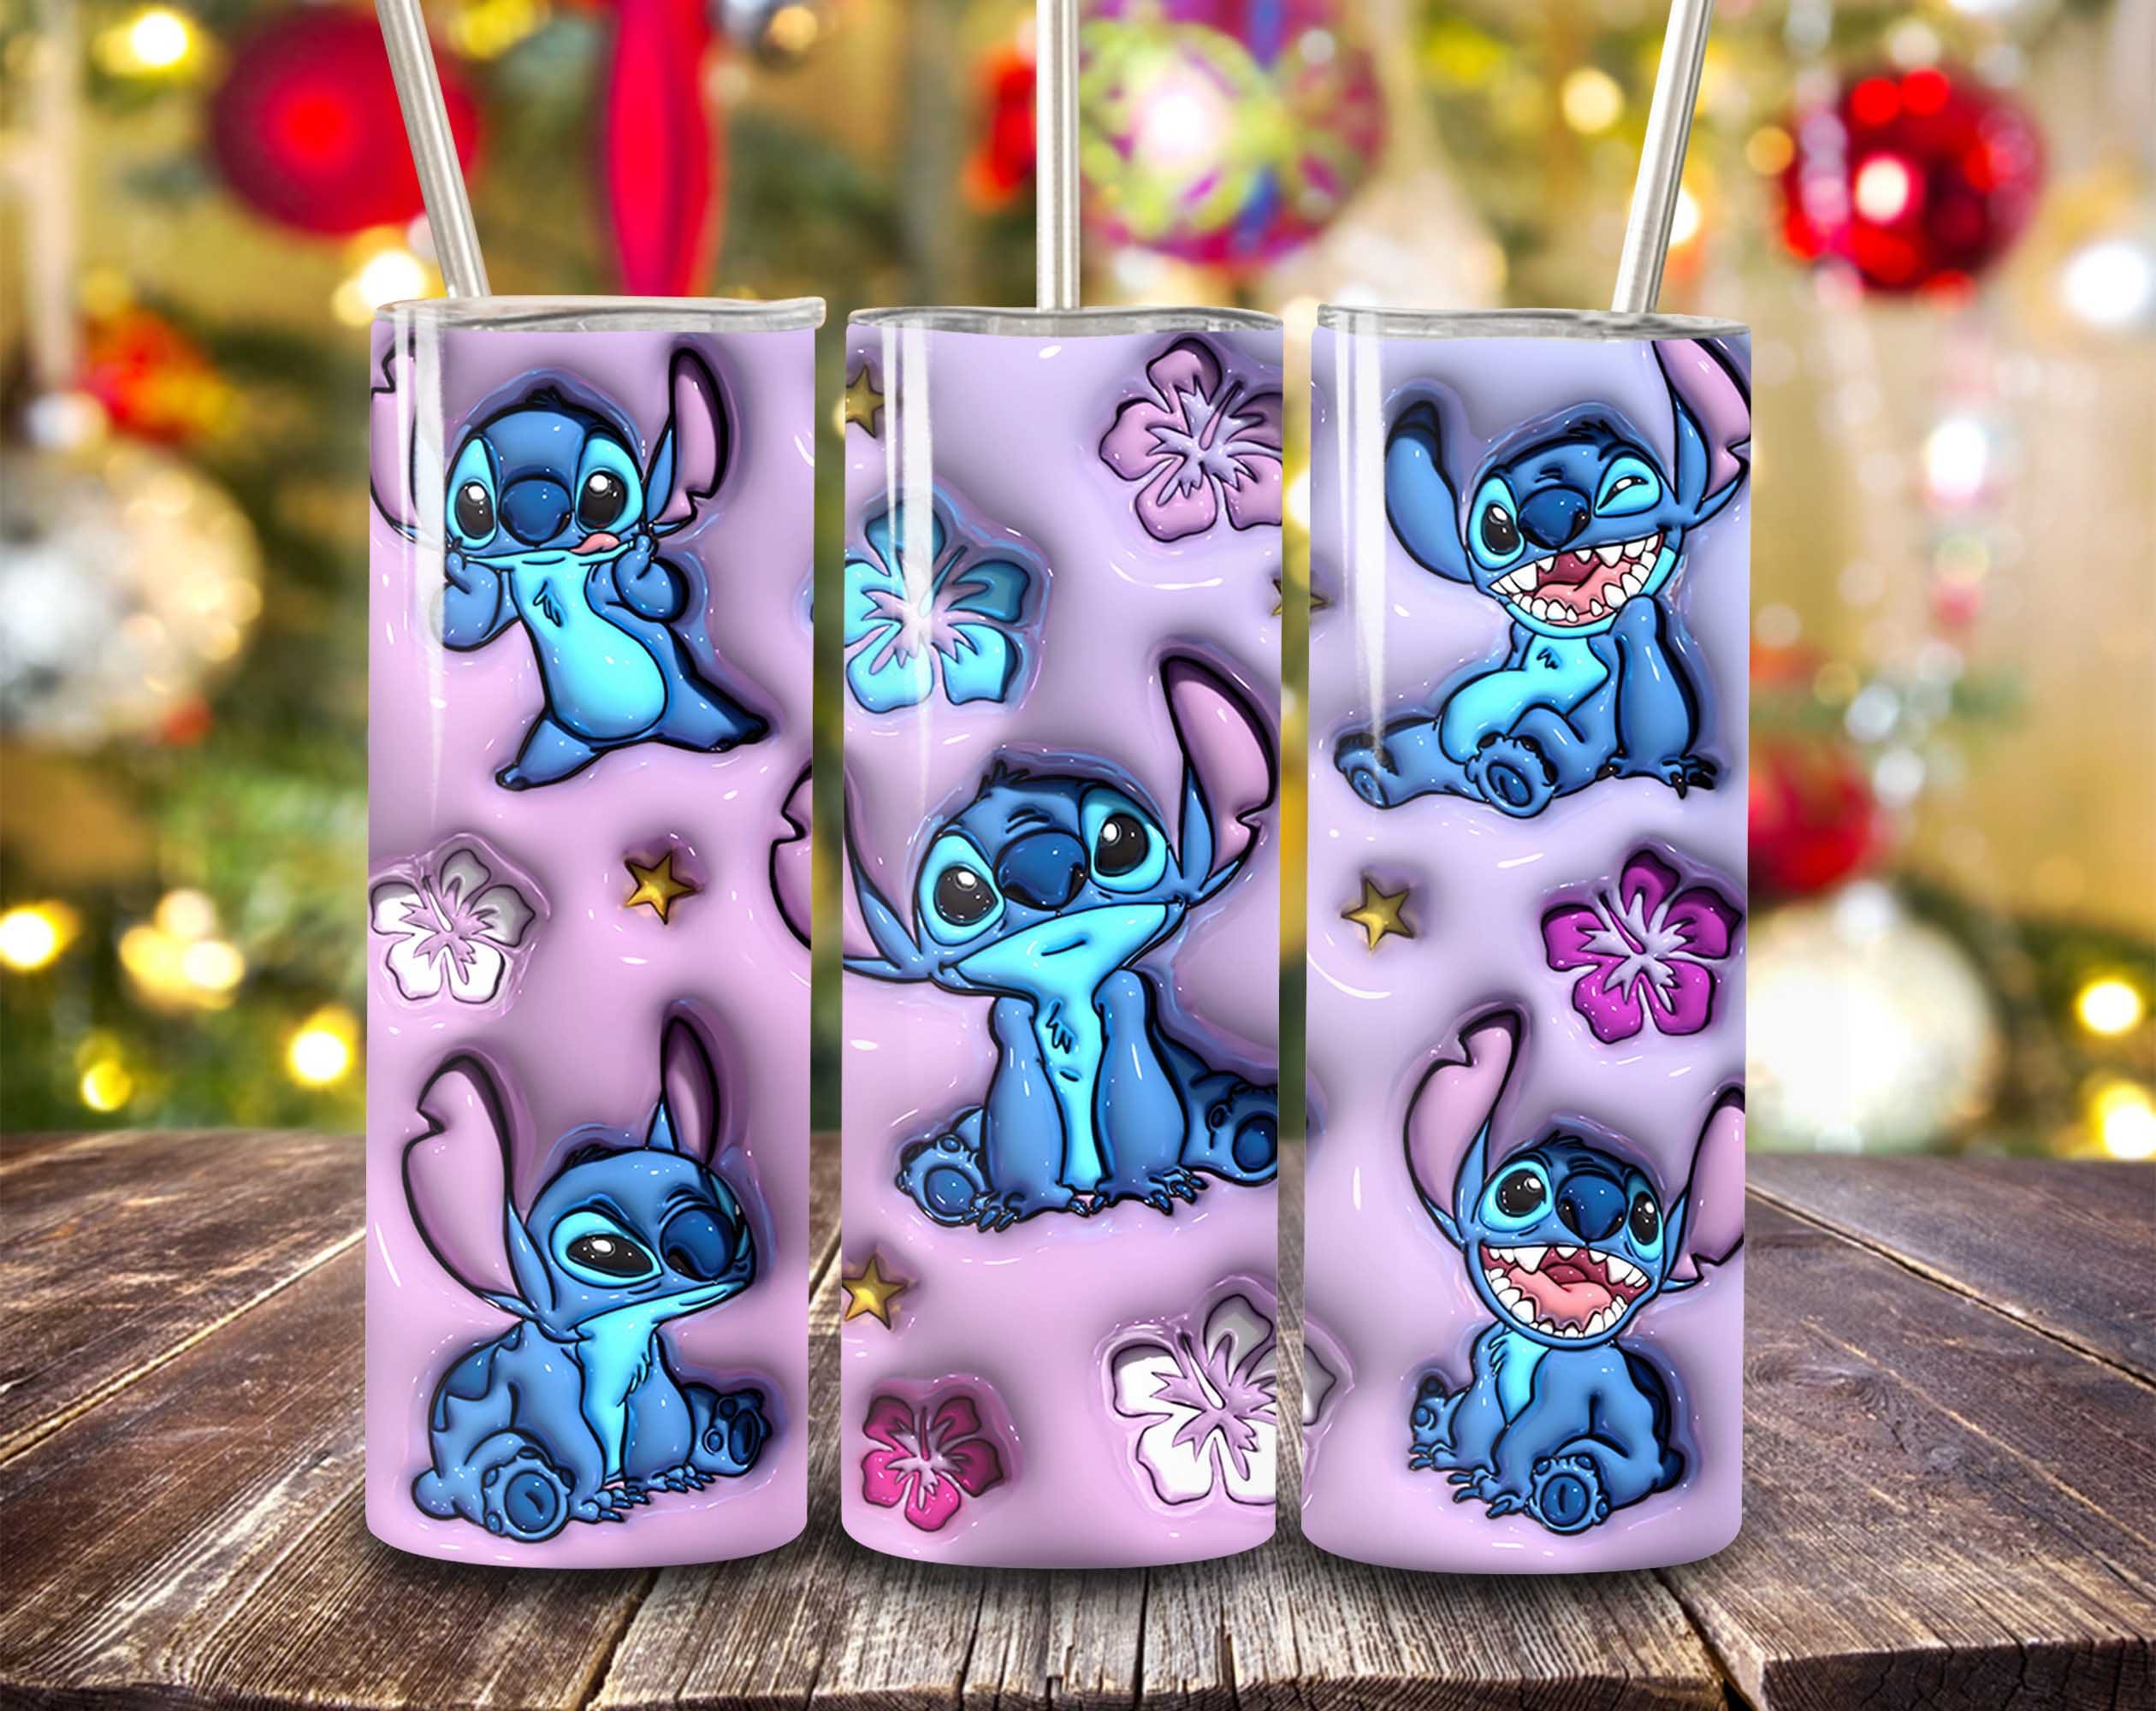 Disneyfind - NEW Stitch wrapping paper from Primark 💙